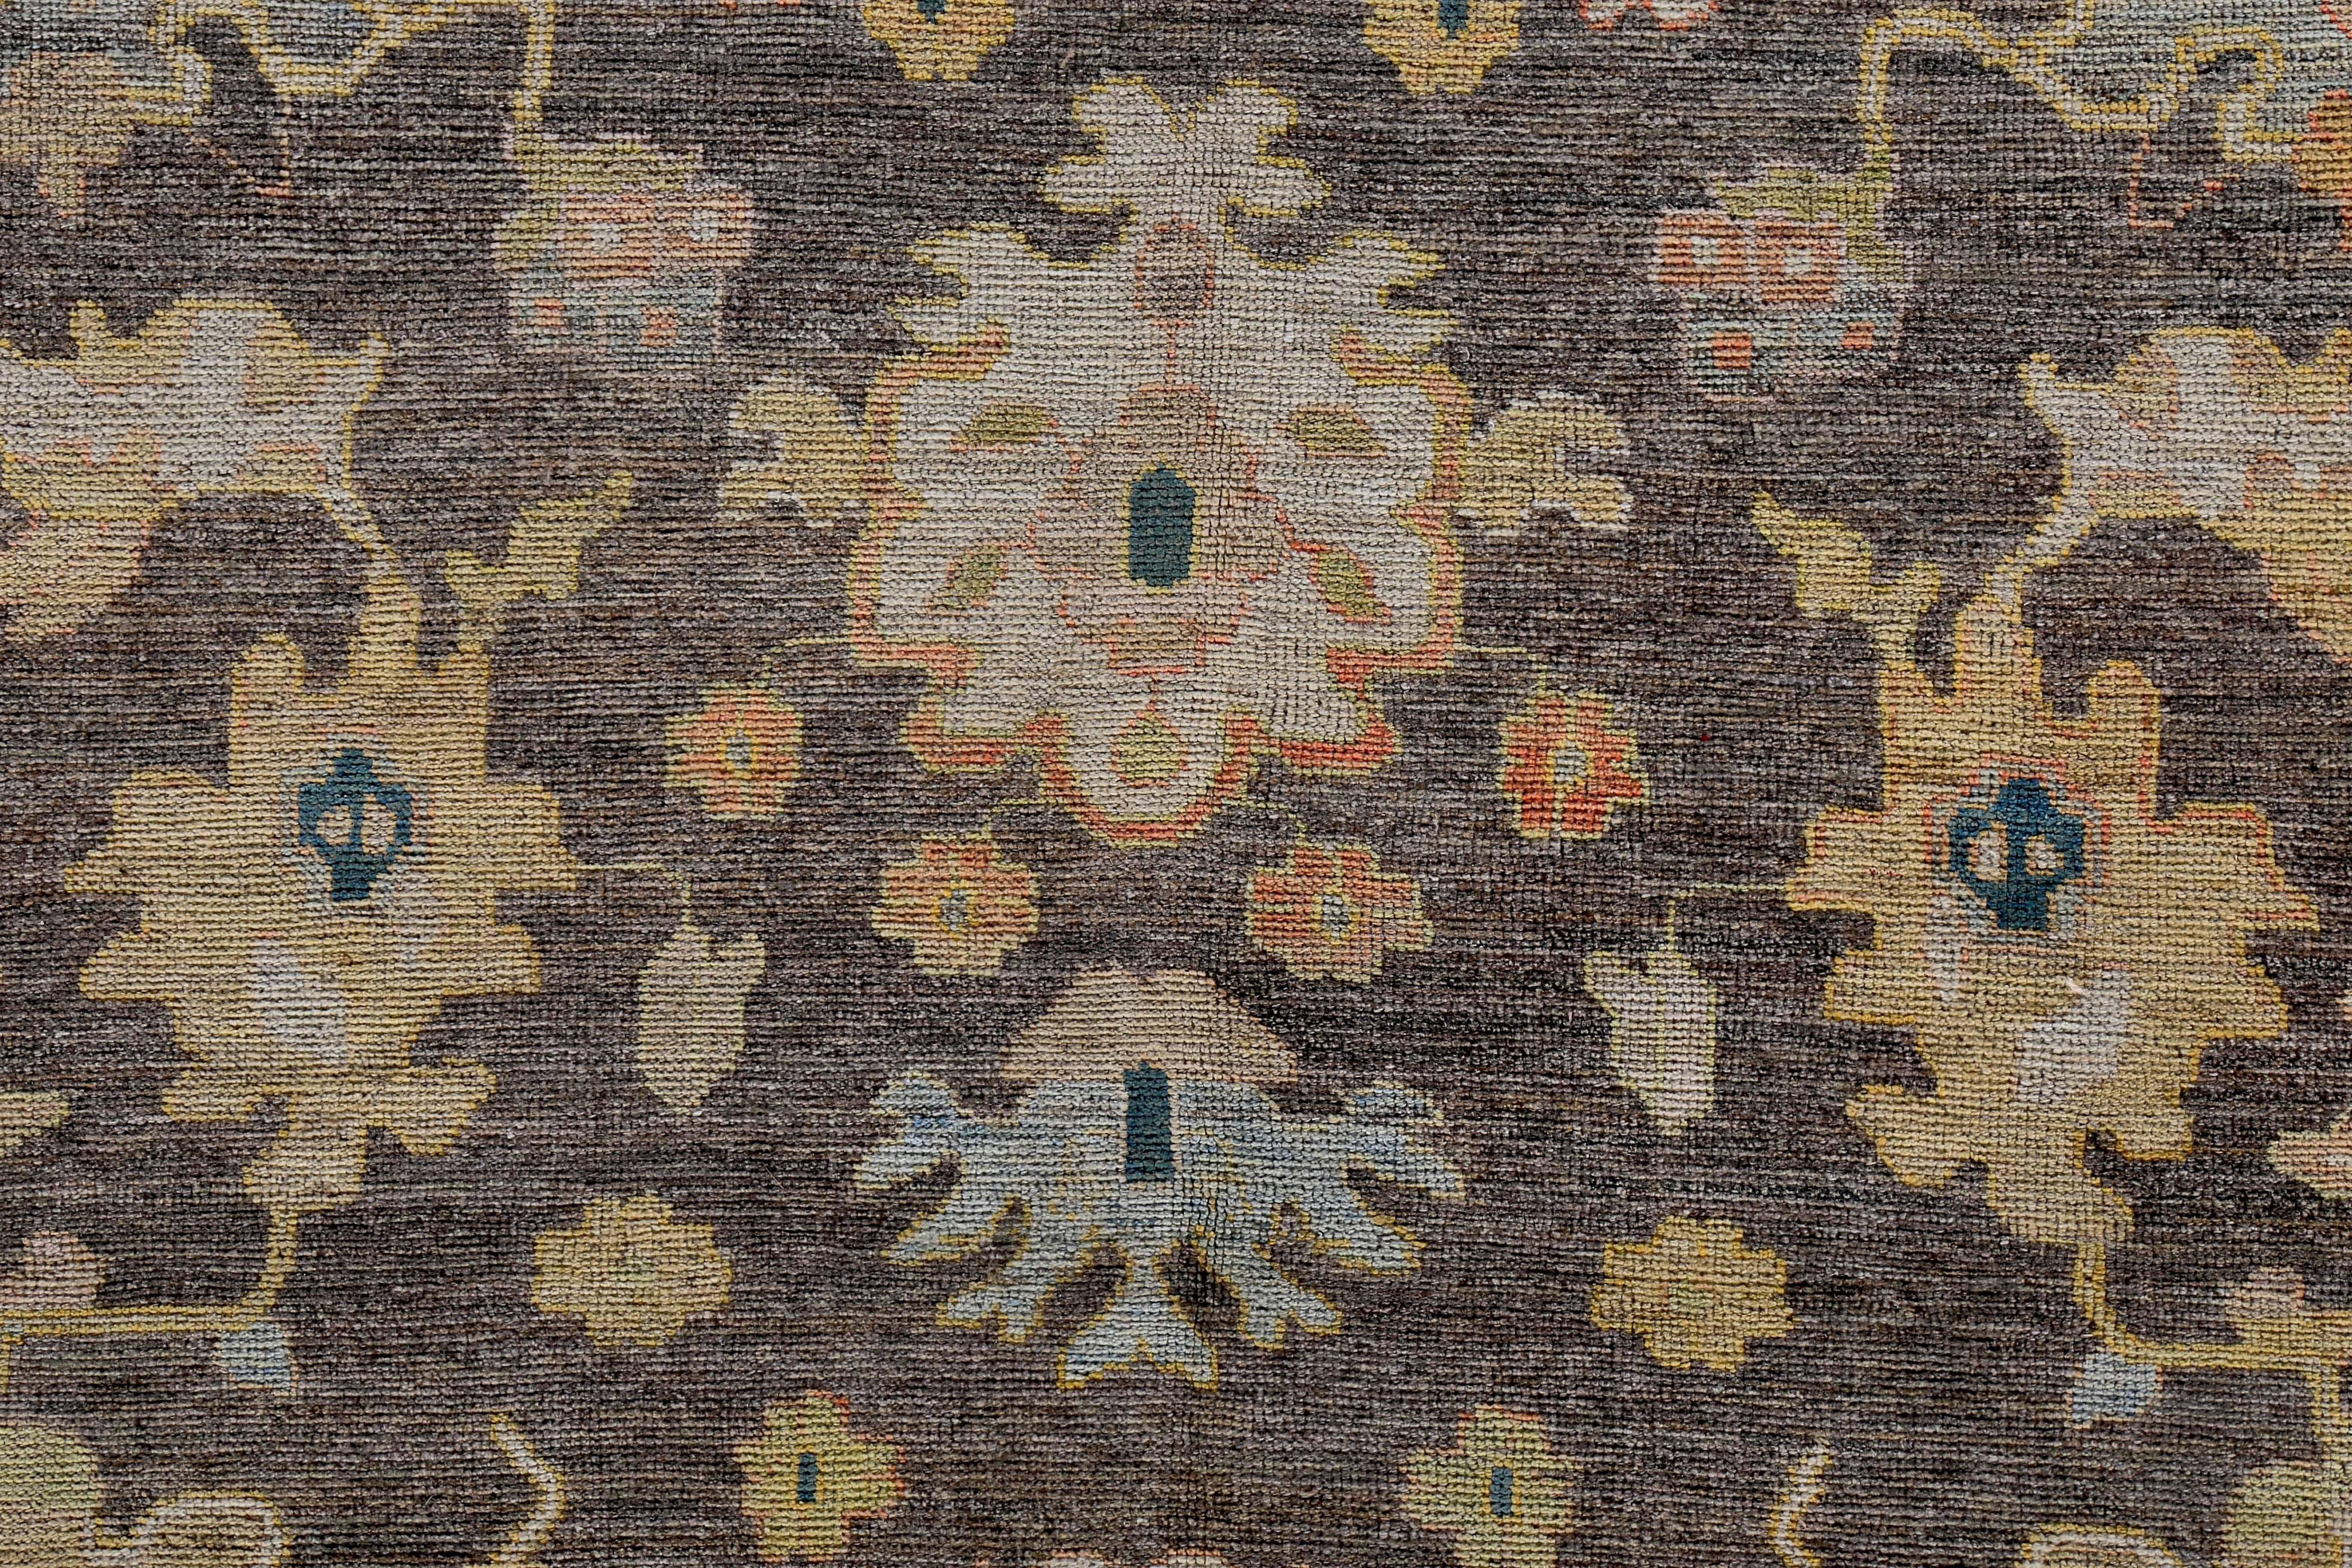 Hand-Woven Turkish Oushak Rug with Blue and Gold Floral Details on Brown and Ivory Field For Sale